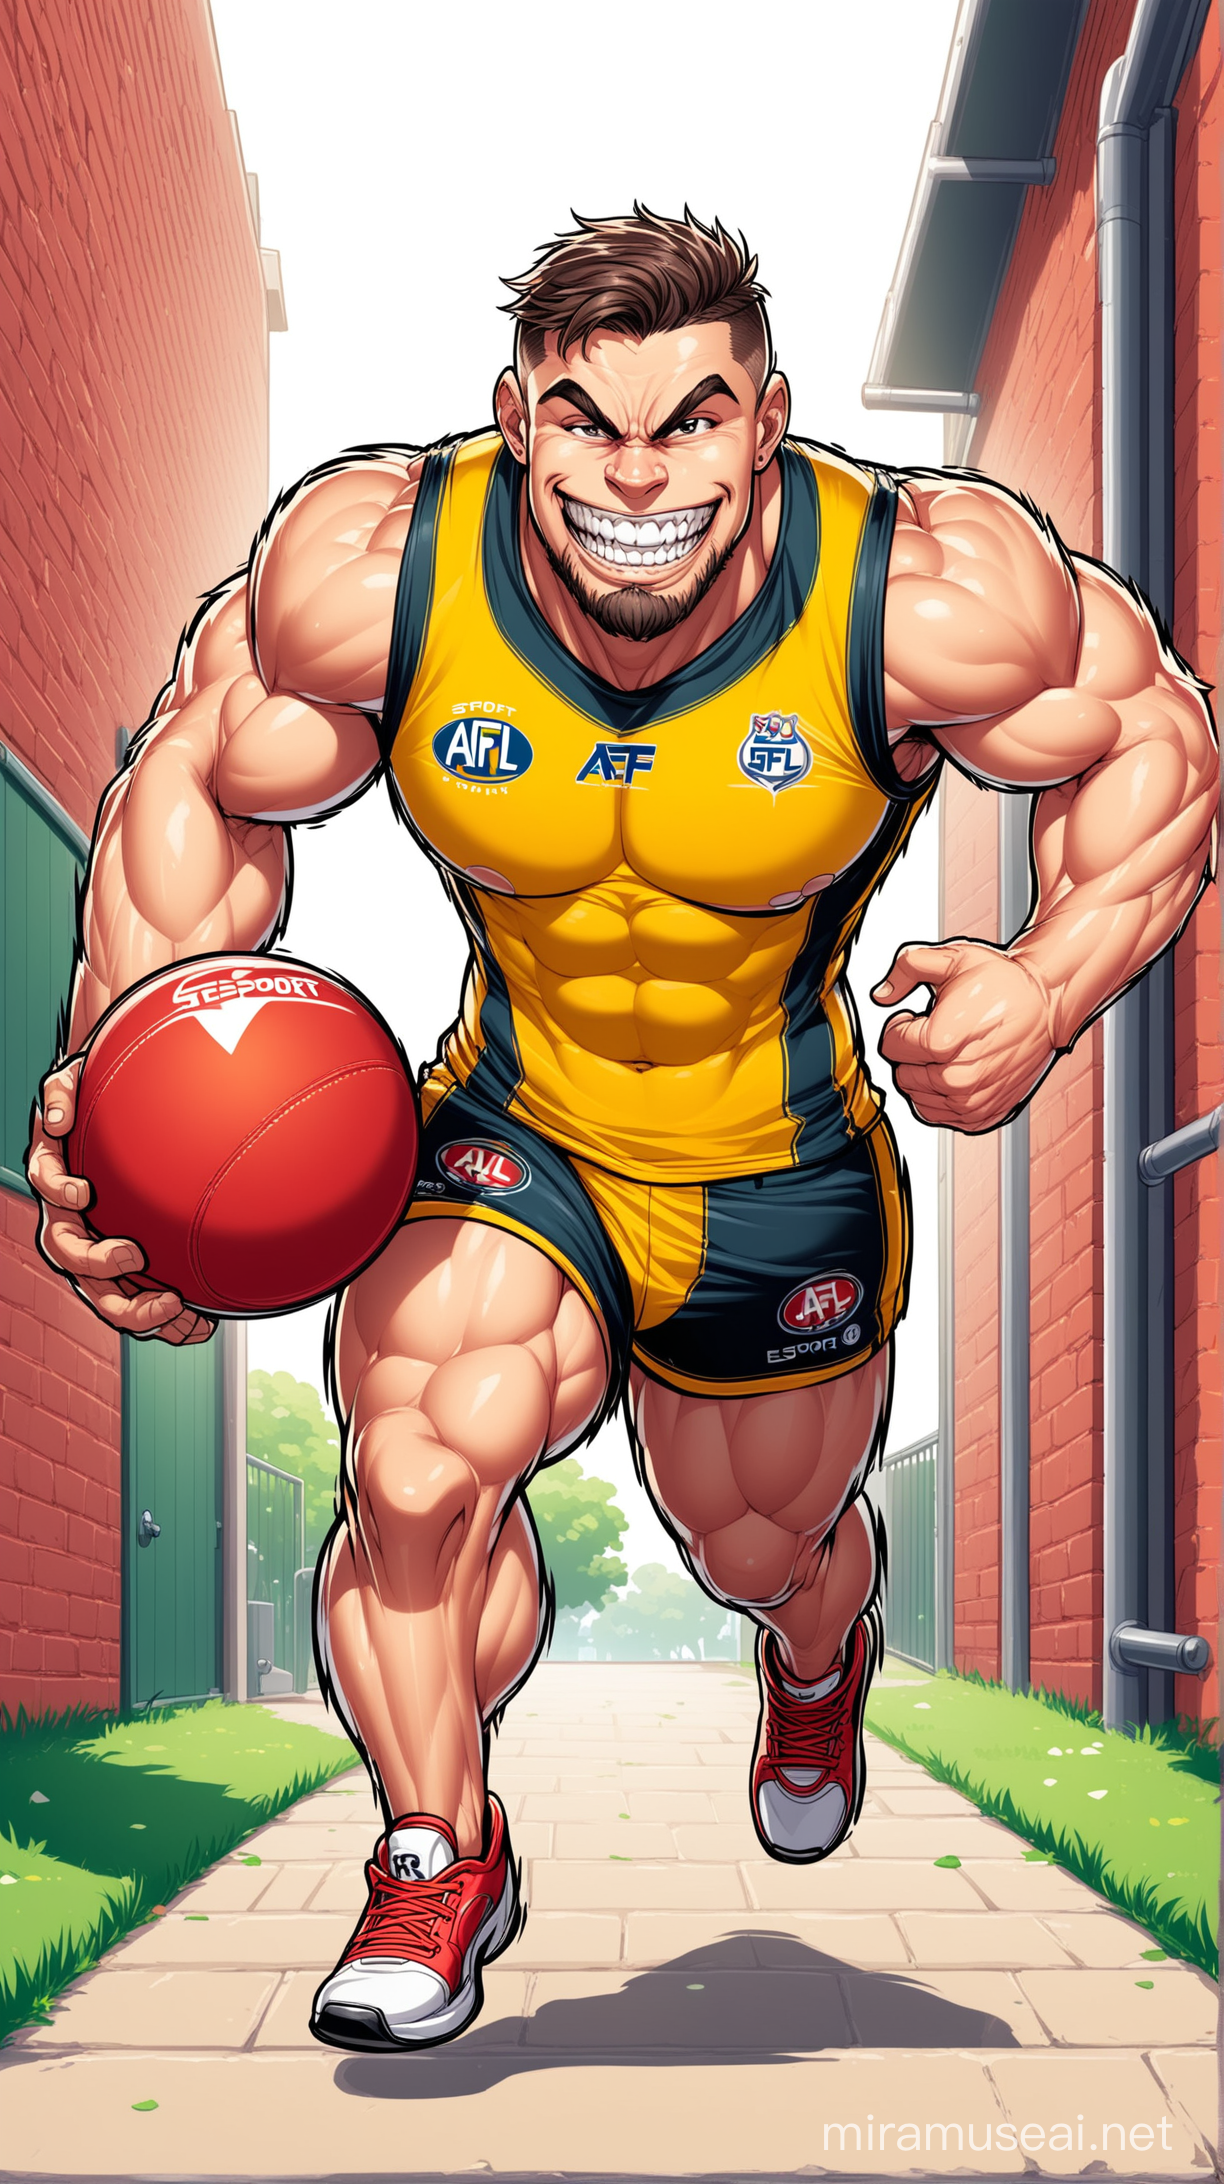 Cartoonish AFL Player Running with a Grinning Stoop Down Pose